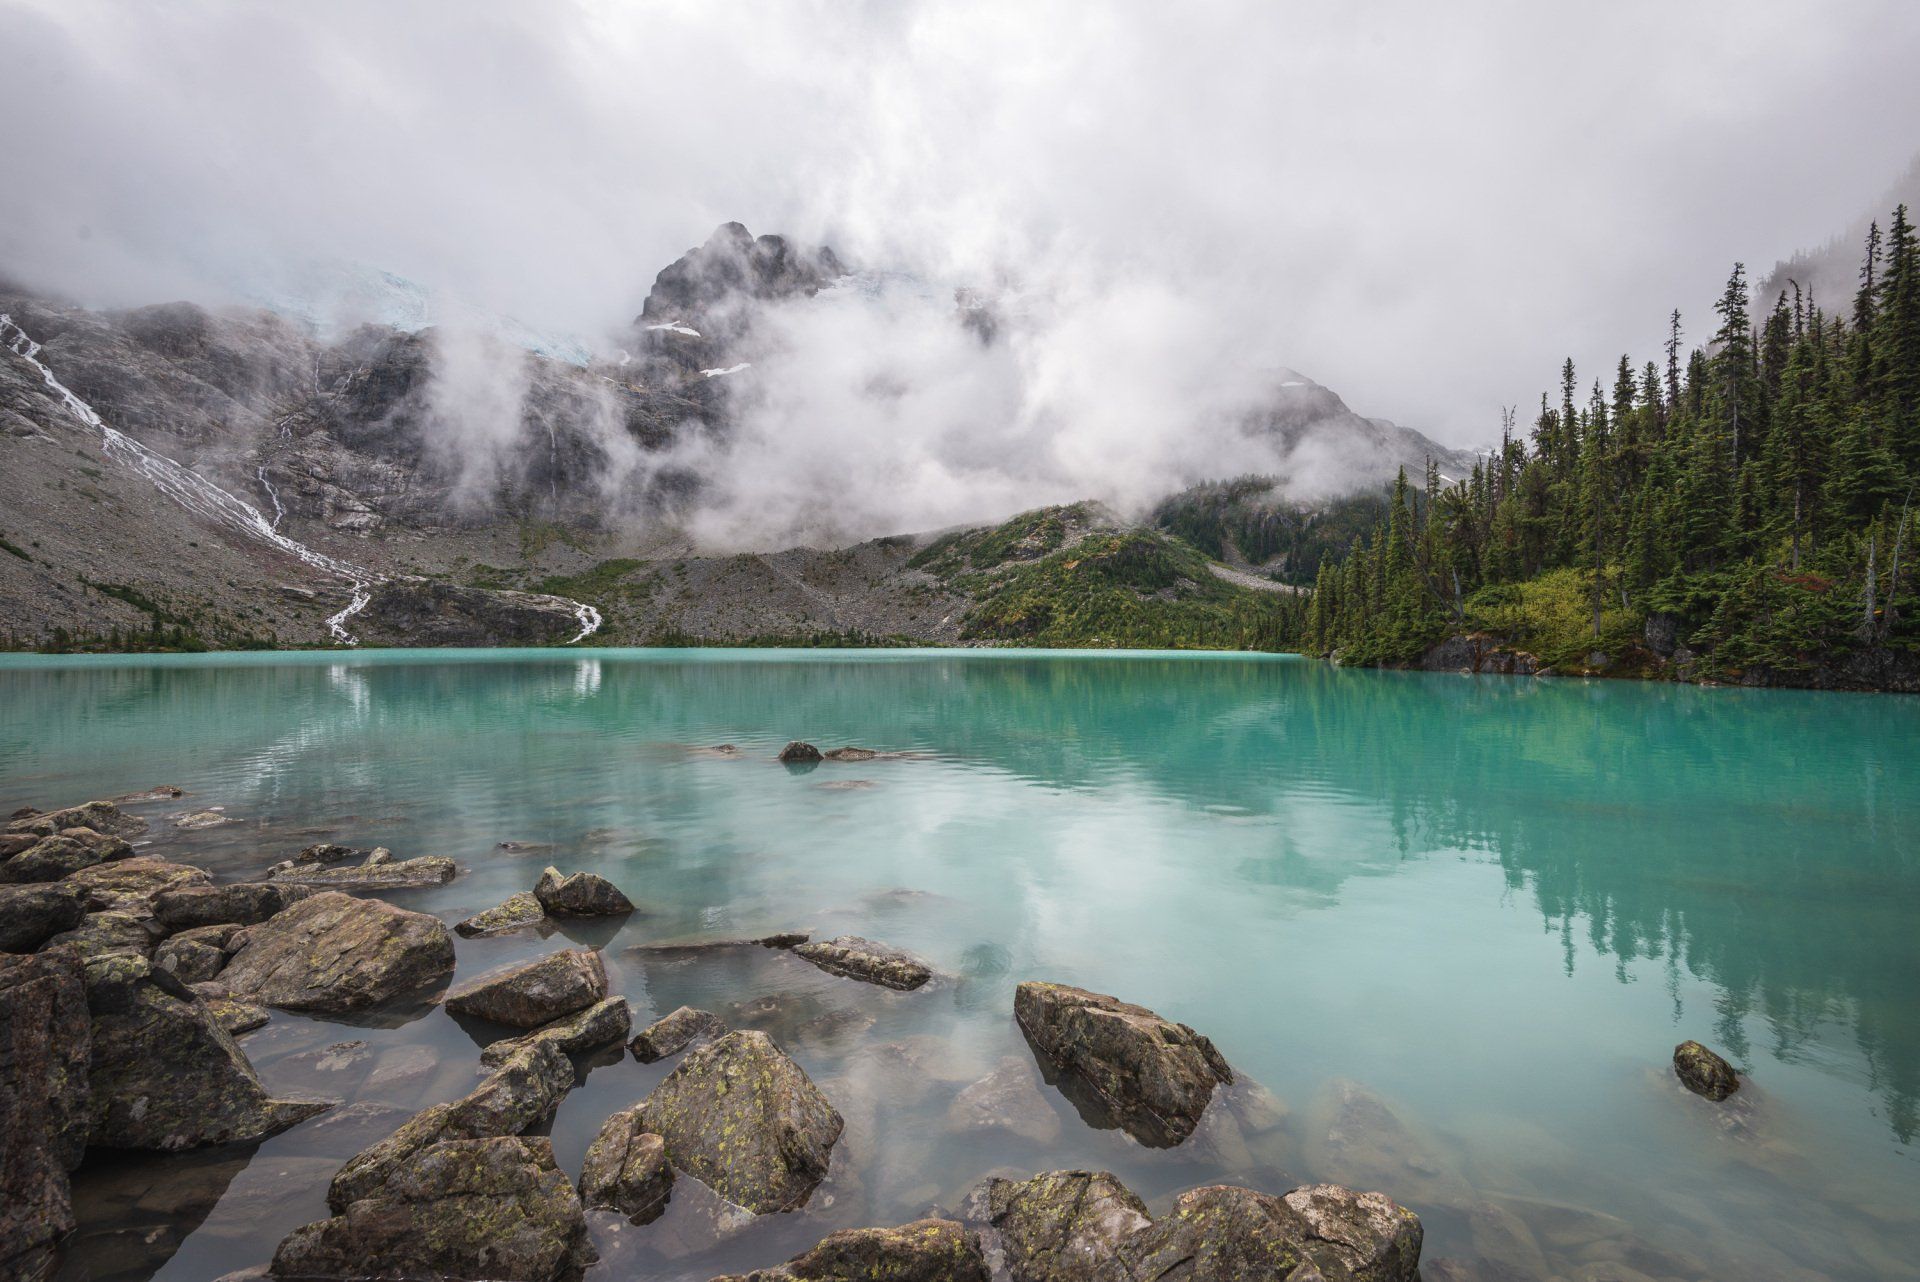 Upper Joffre lake with surrounding mountains and glacier behind the low clouds, Joffre Lakes Provincial Park, BC, Canada